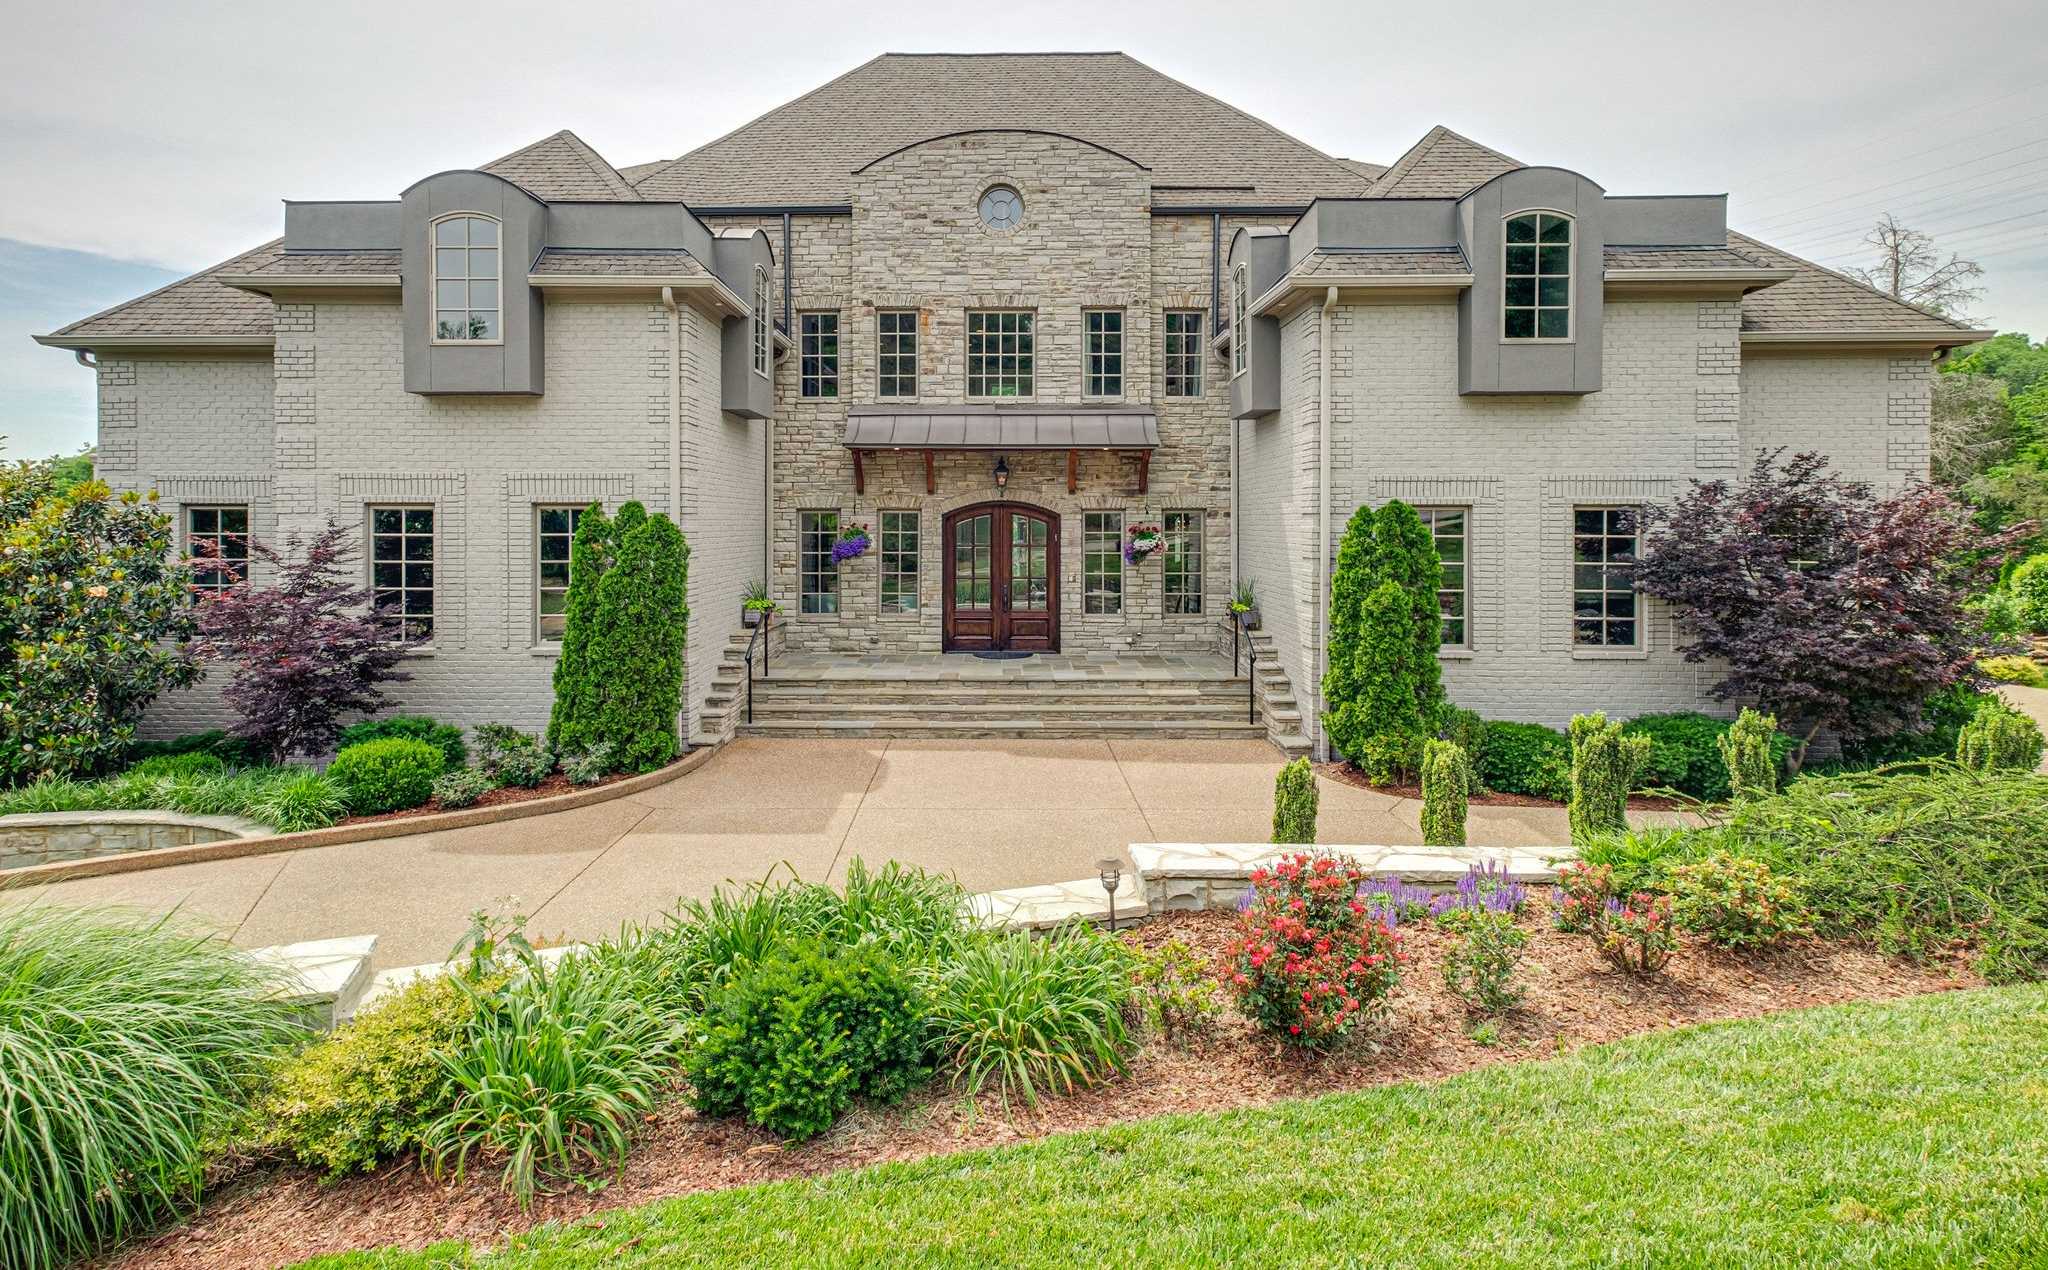 $4,395,000 - 5Br/7Ba -  for Sale in Richlands Woods, Brentwood